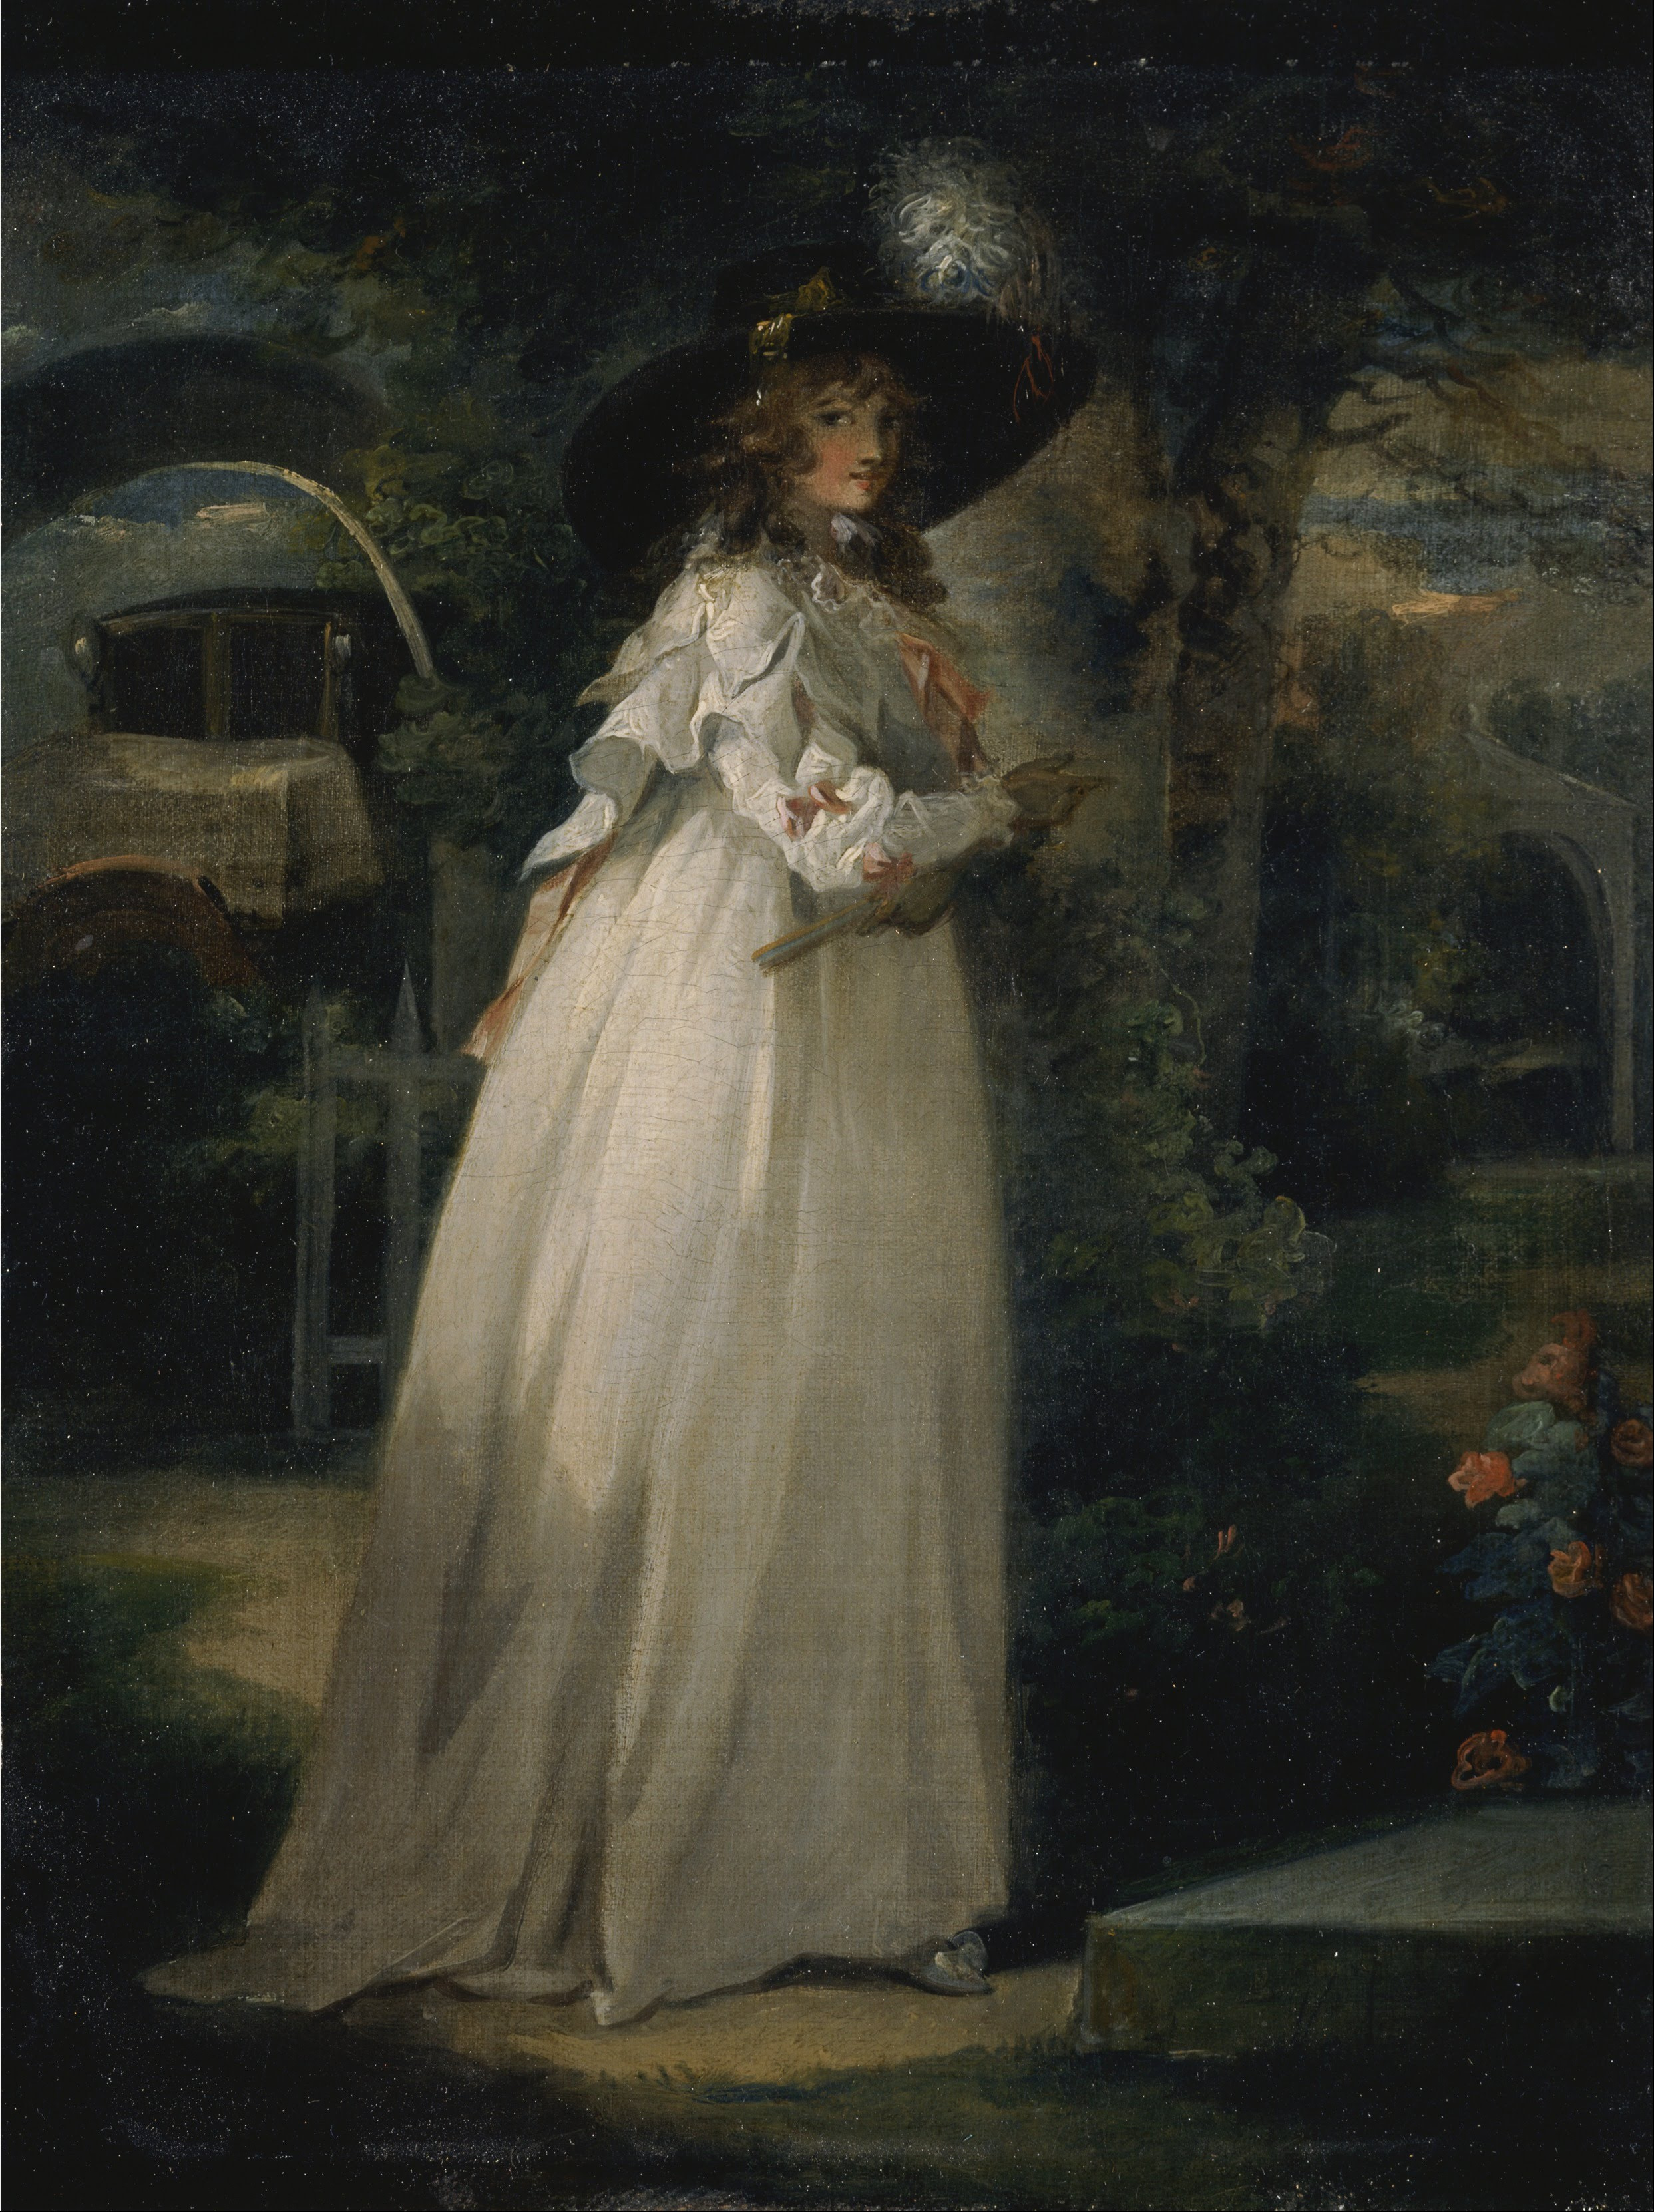 George Morland - Portrait of a Girl in a Garden - Google Art Project